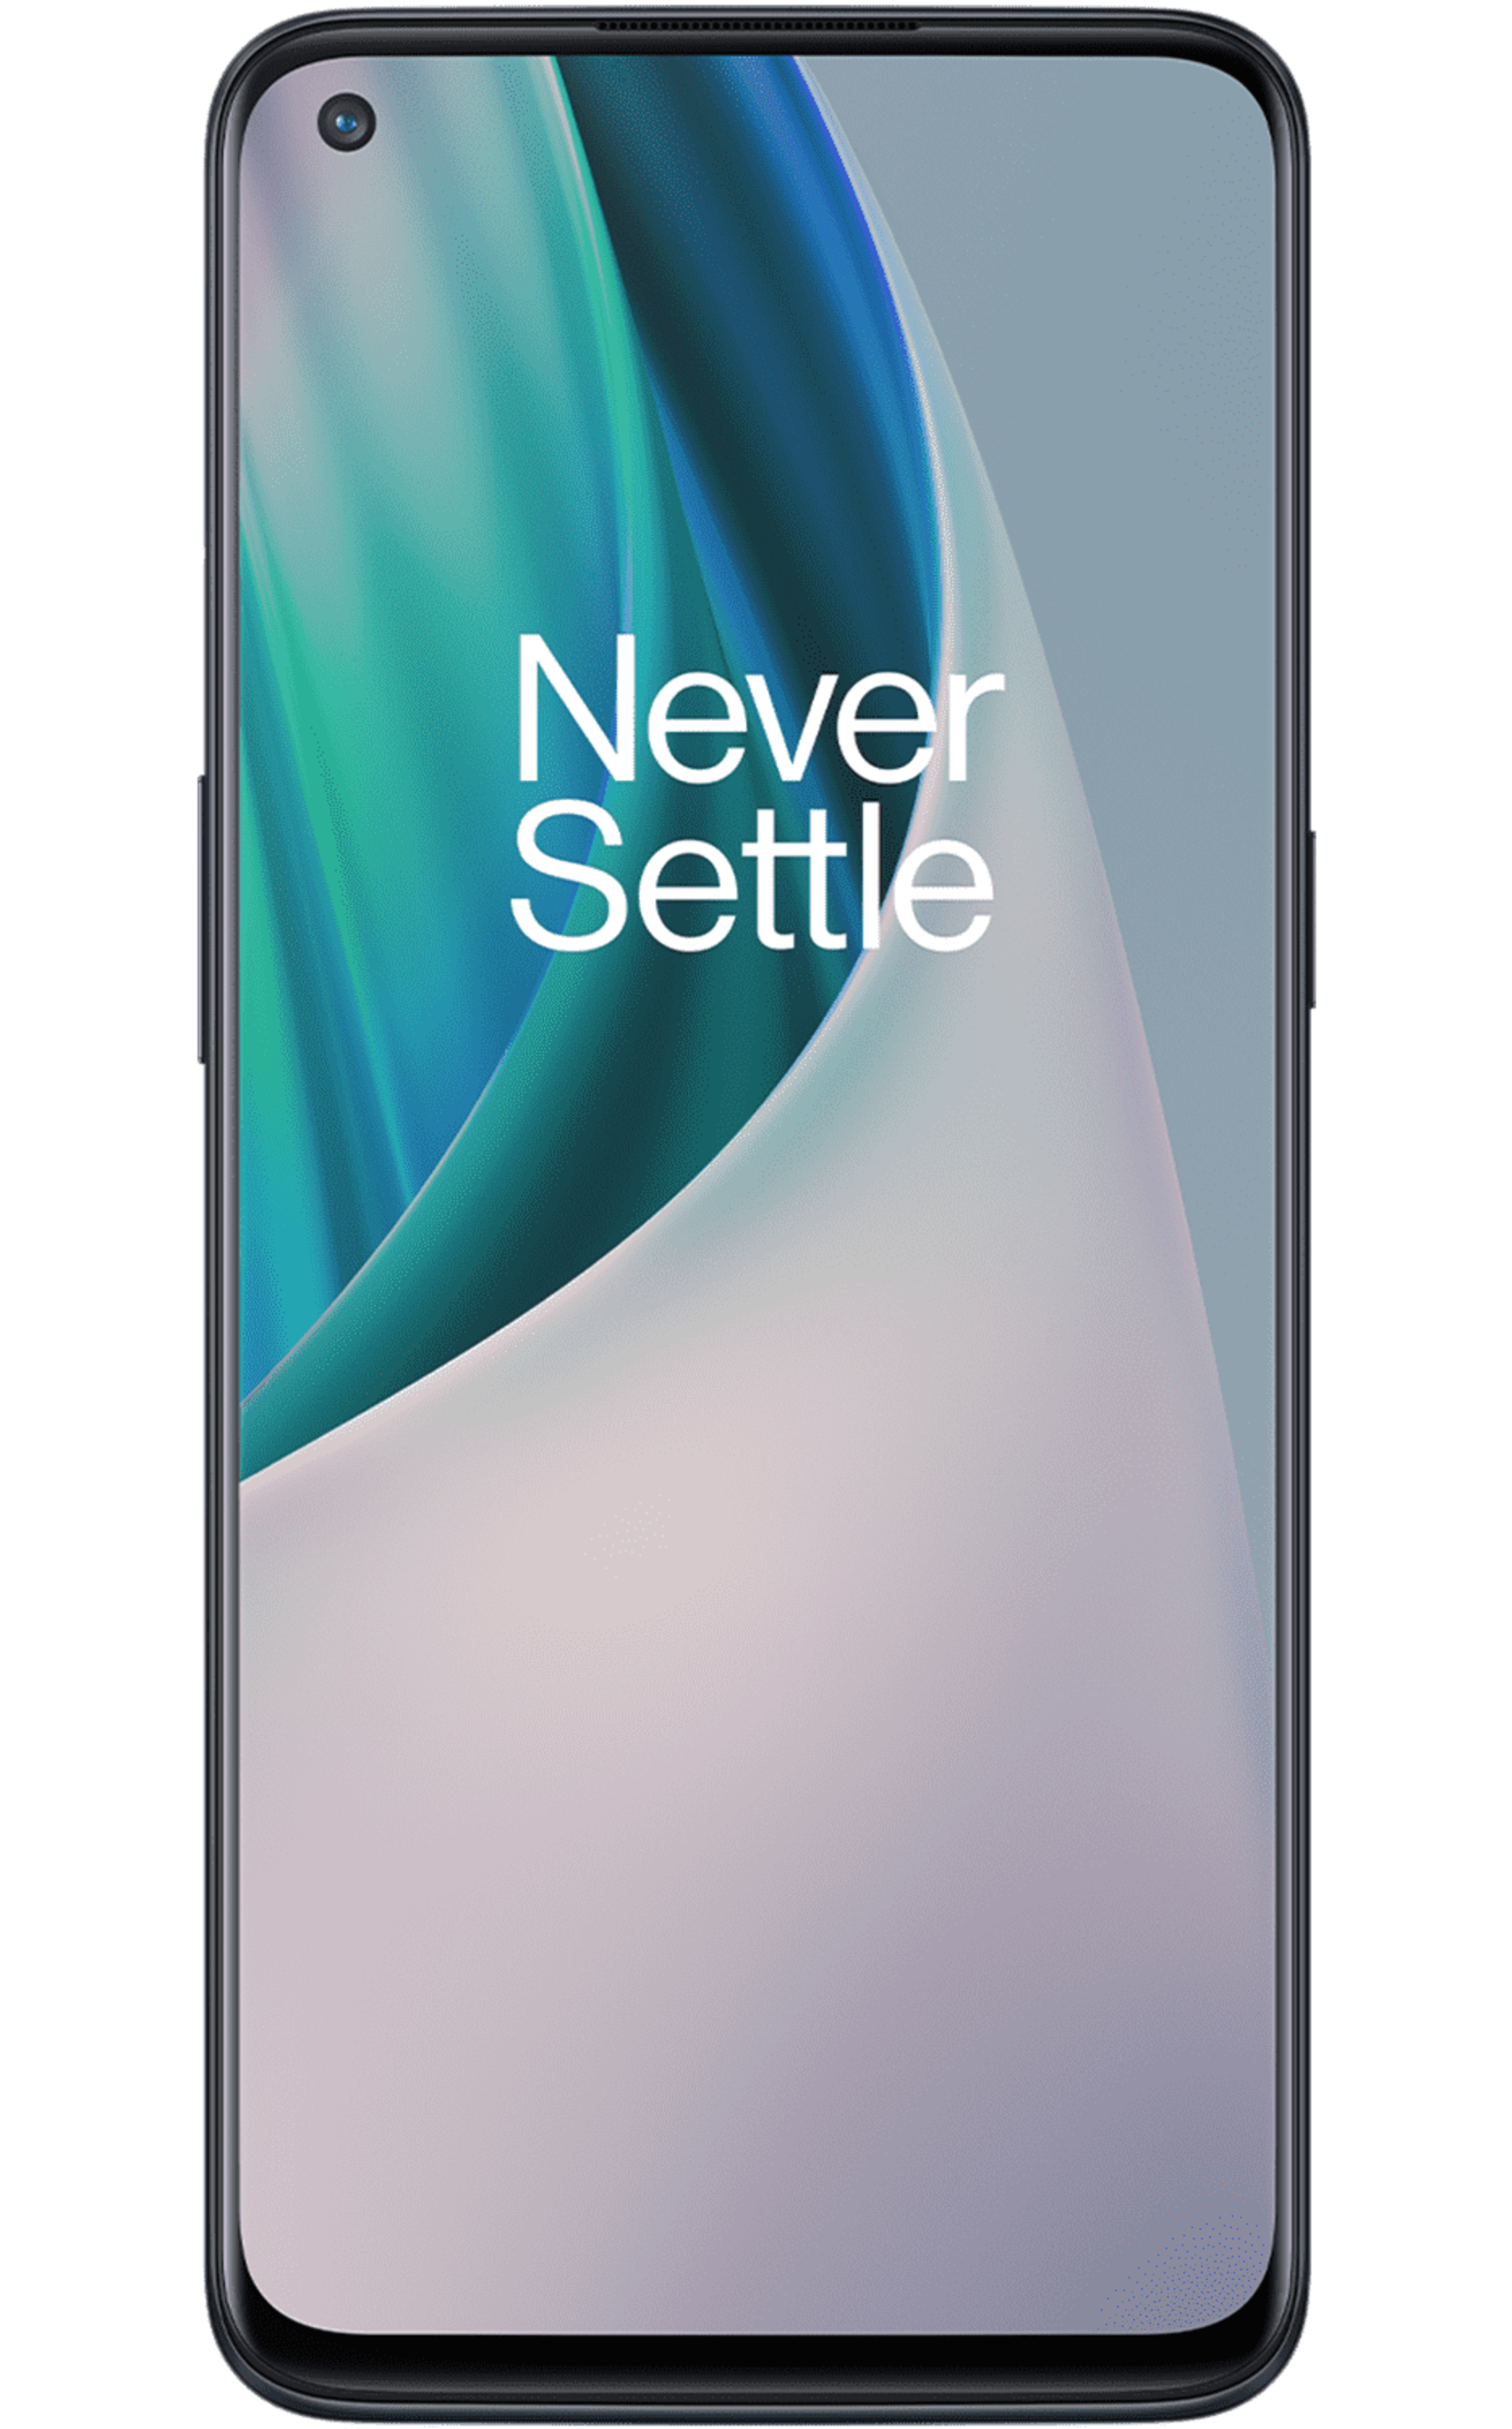 OnePlus Nord N10 5G BE2026 128GB GSM / CDMA Unlocked Android Smartphone - Midnight Ice - image 1 of 3